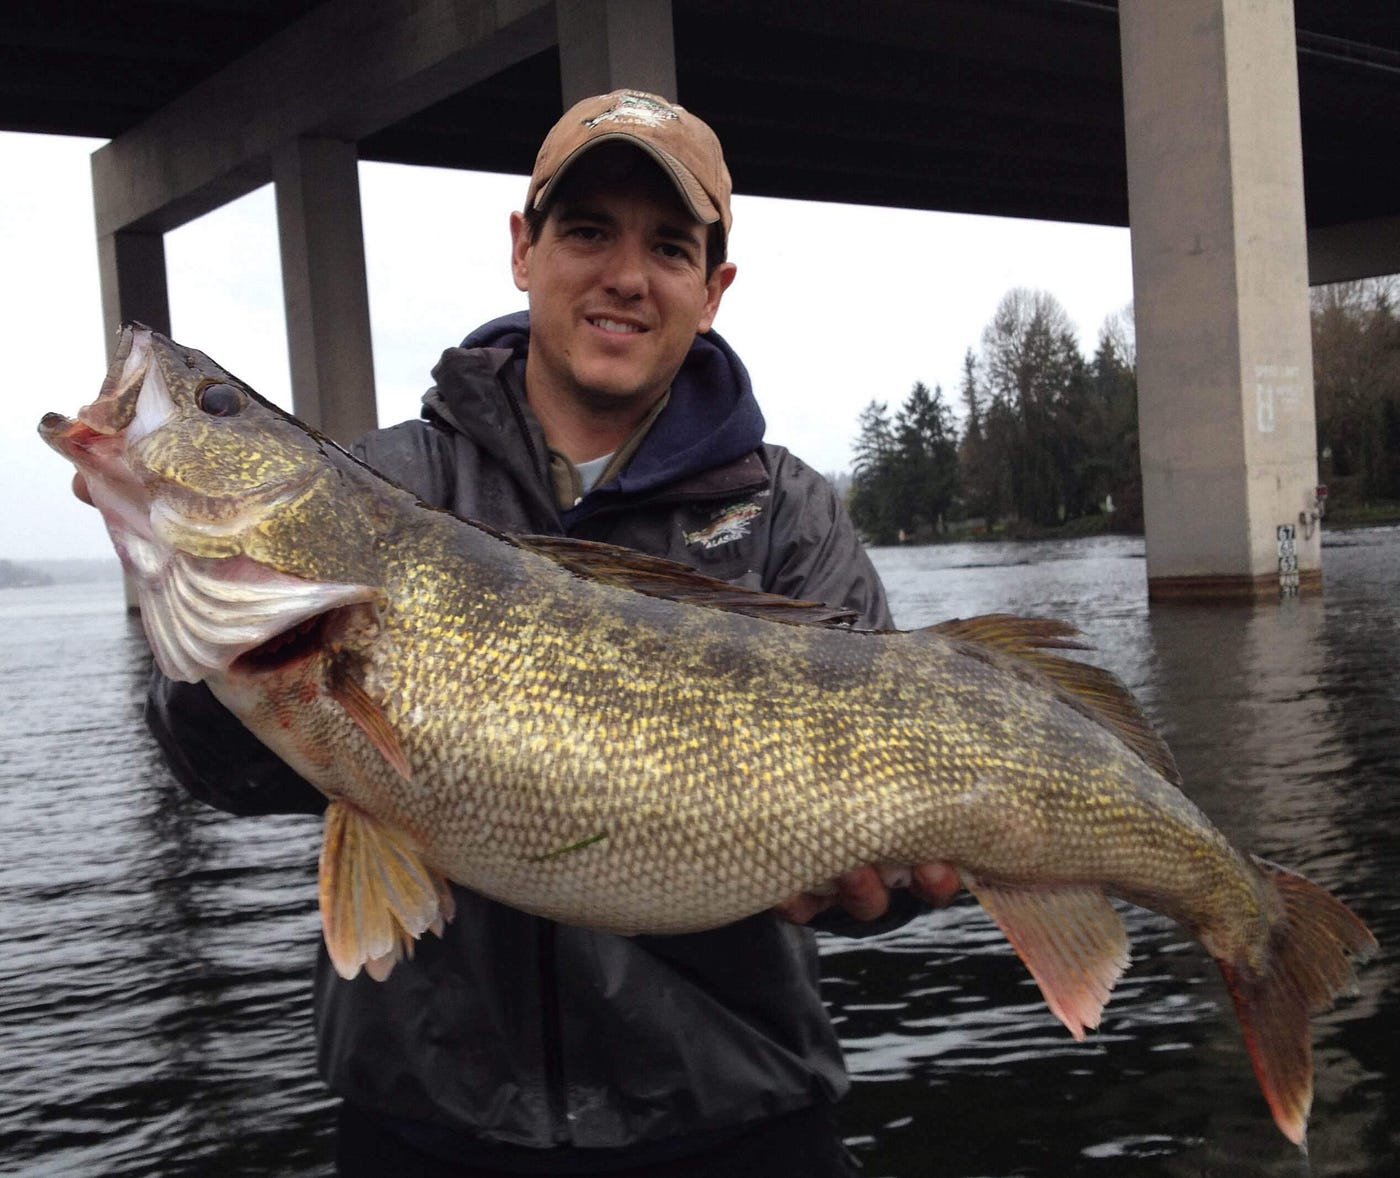 Lake Washington Walleye Outfitted With Acoustic Tags For Study, by  Northwest Sportsman